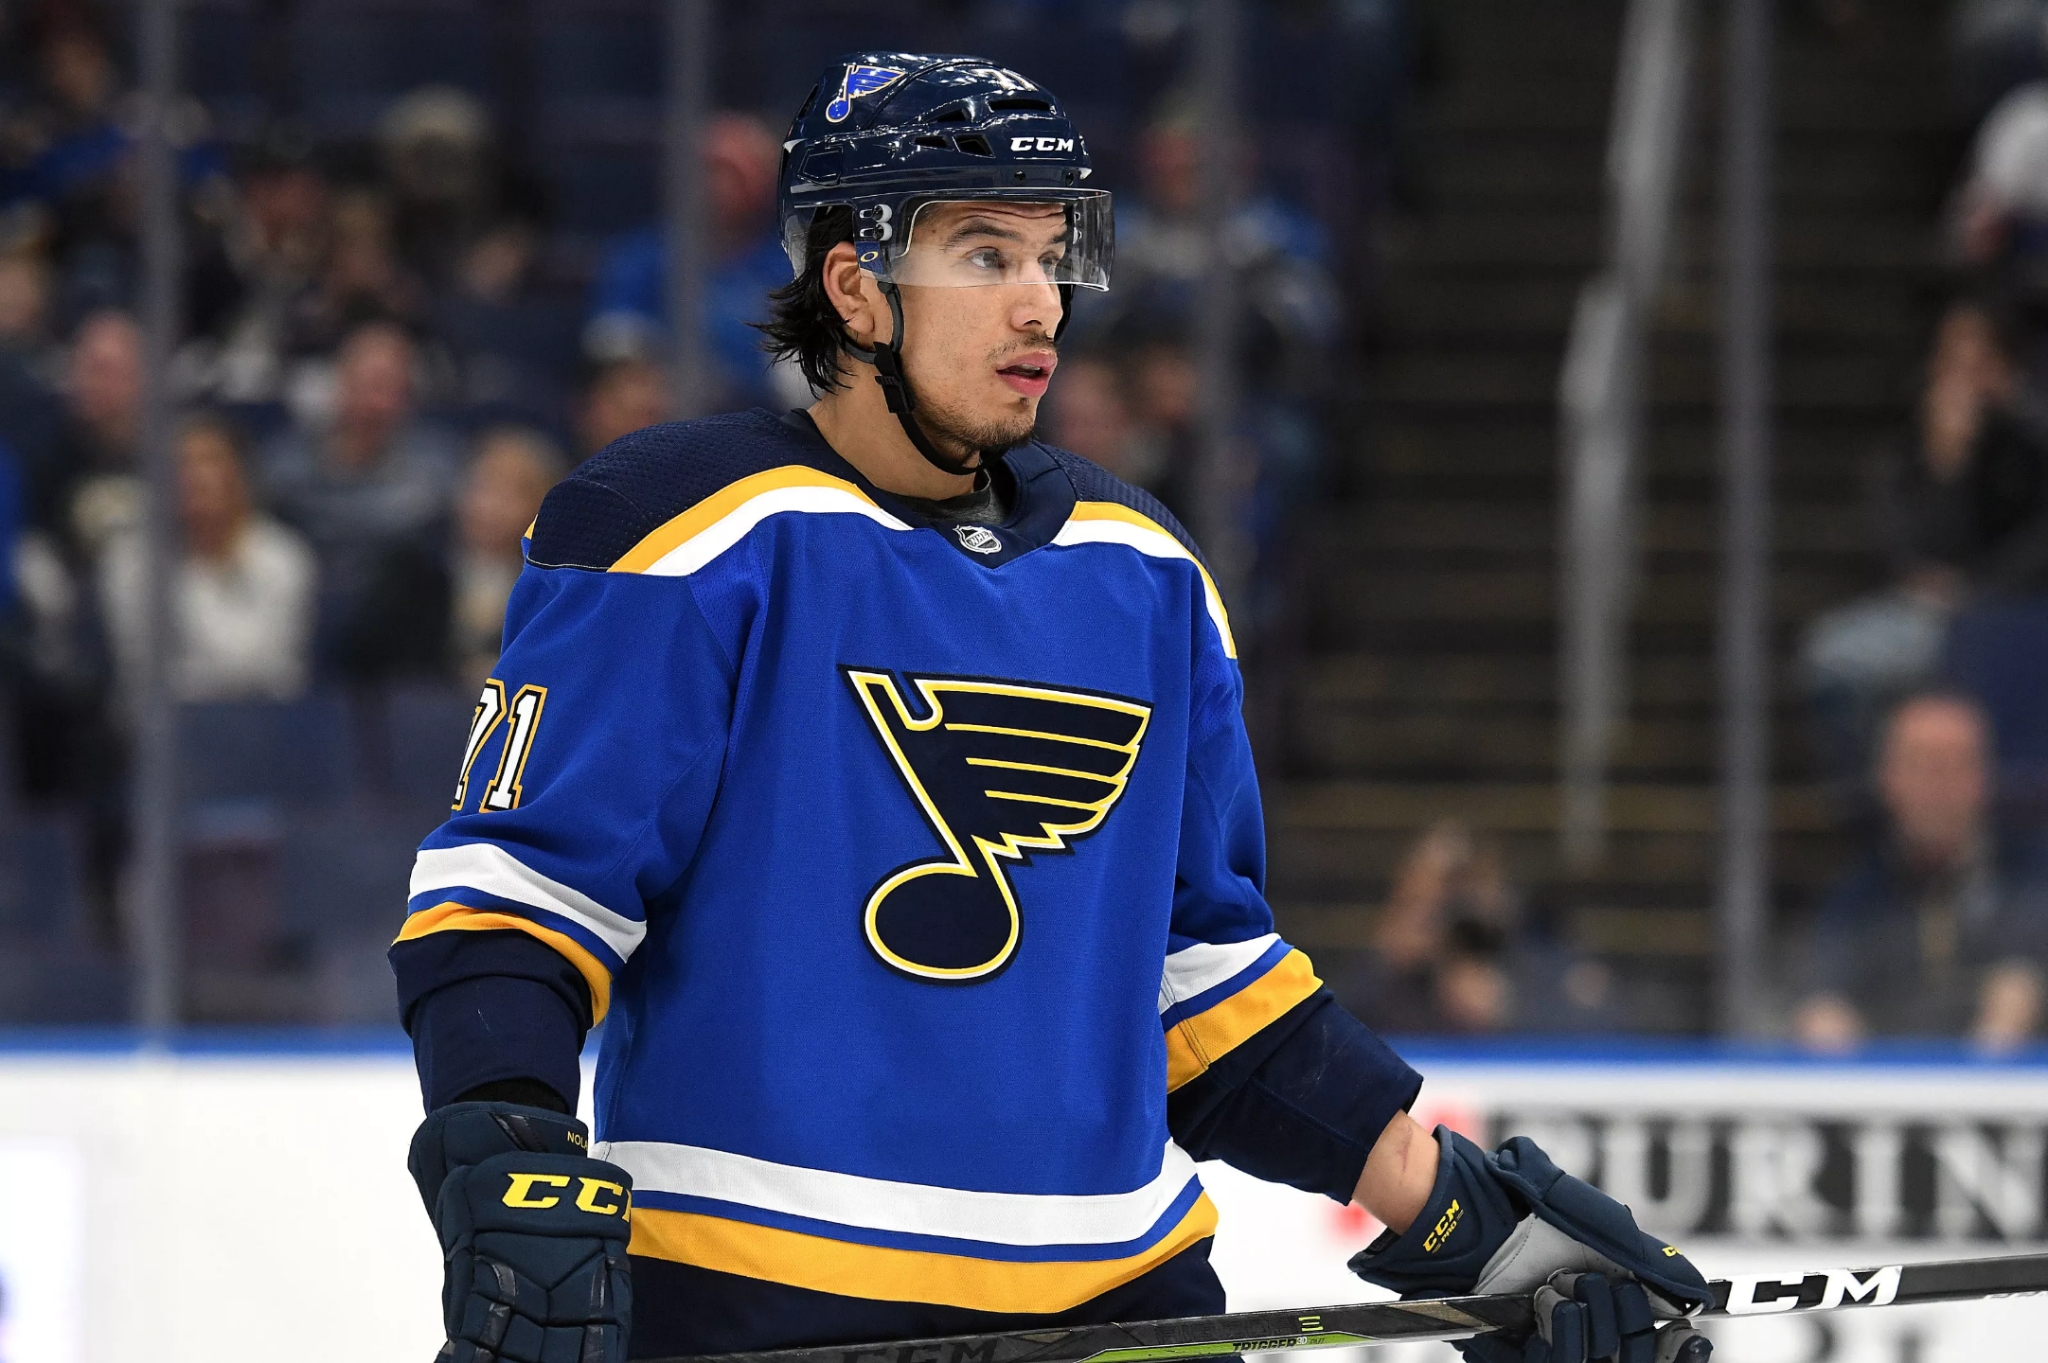 St. Louis Blue’s have recalled forward Jordan Nolan (Ojibwe) from the team’s (AHL) affiliate, the San Antonio Rampage